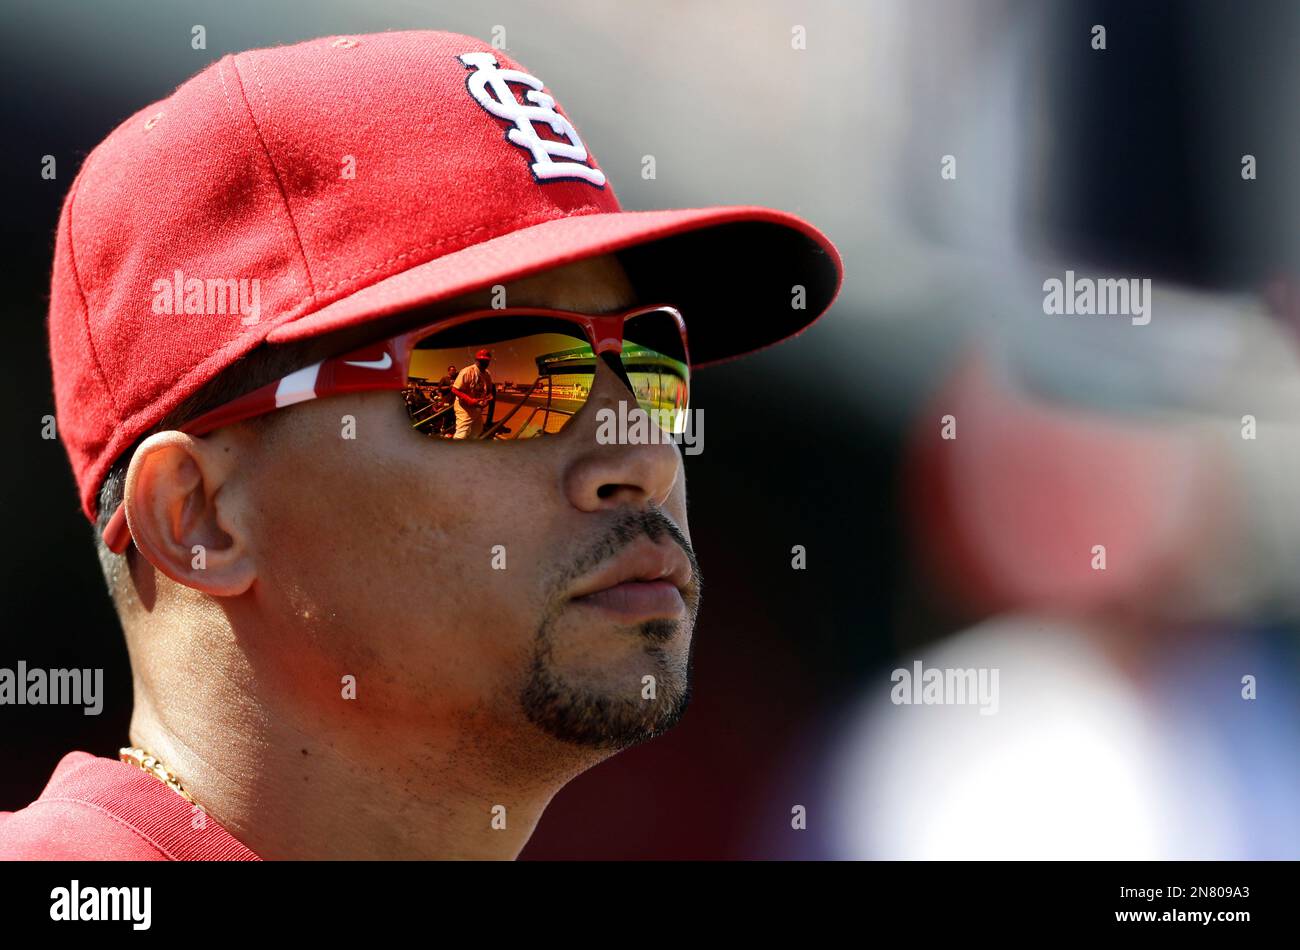 St. Louis Cardinals third base coach Jose Oquendo walks in the dugout  wearing the uniform of the St. Louis Stars of the Negro League before a  baseball game against the Pittsburgh Pirates